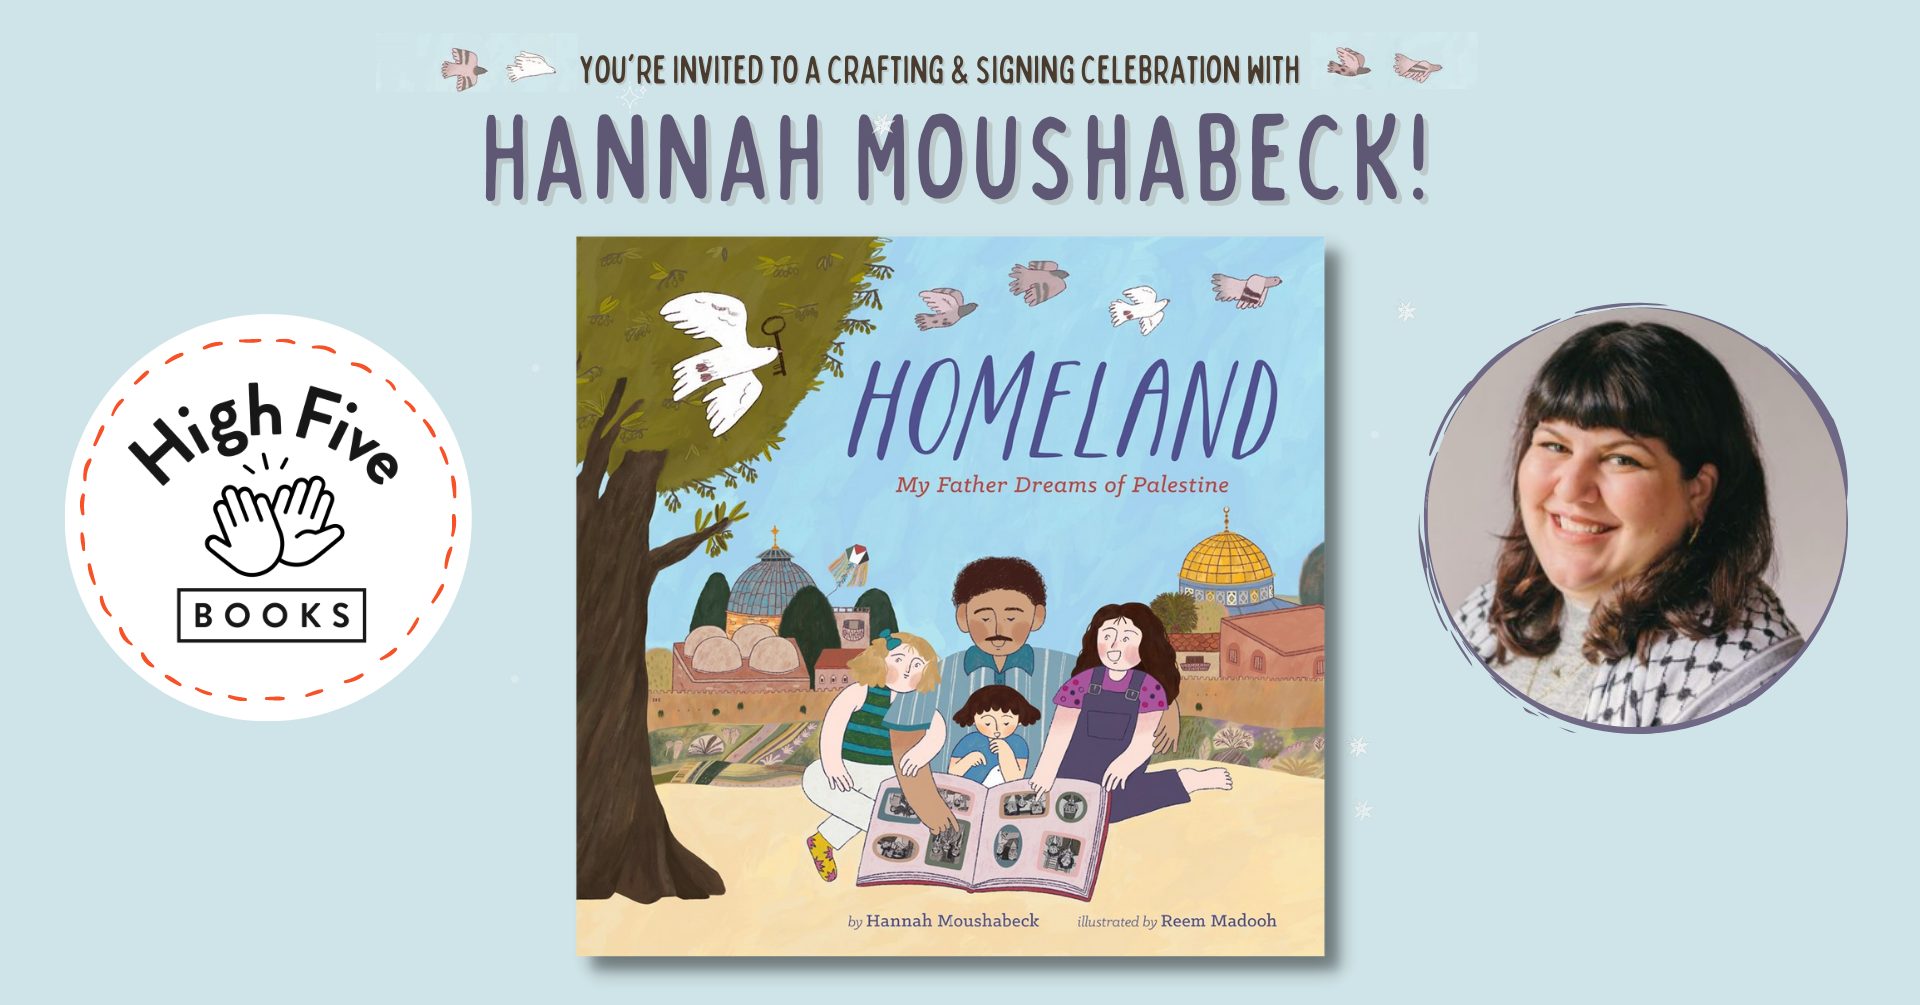 Meet & Craft with Hannah Moushabeck!